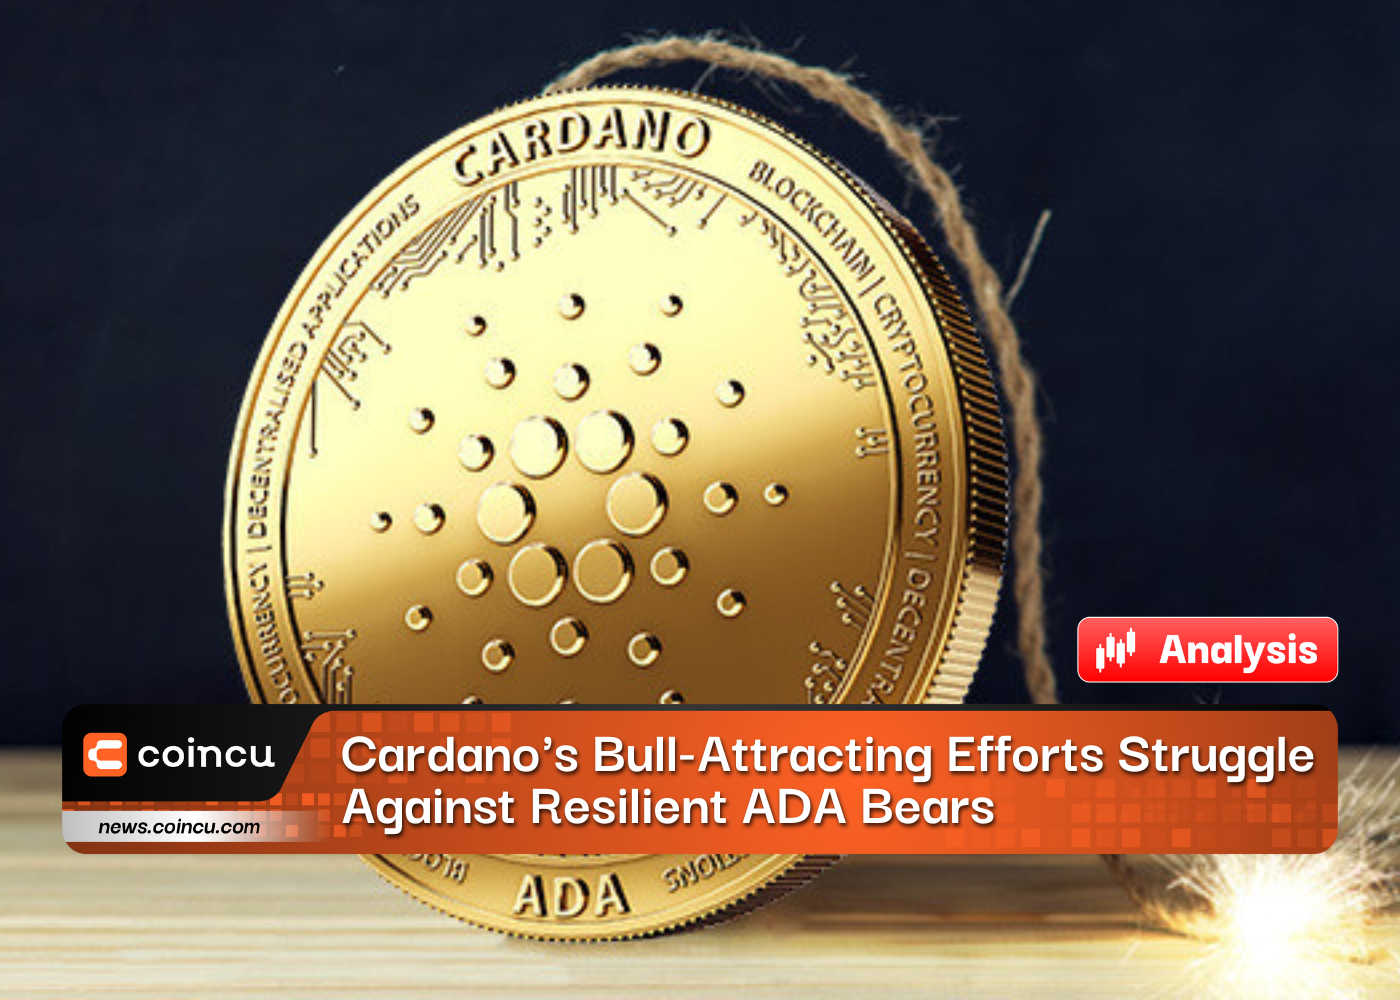 Cardano's Bull-Attracting Efforts Struggle Against Resilient ADA Bears - CoinCu News